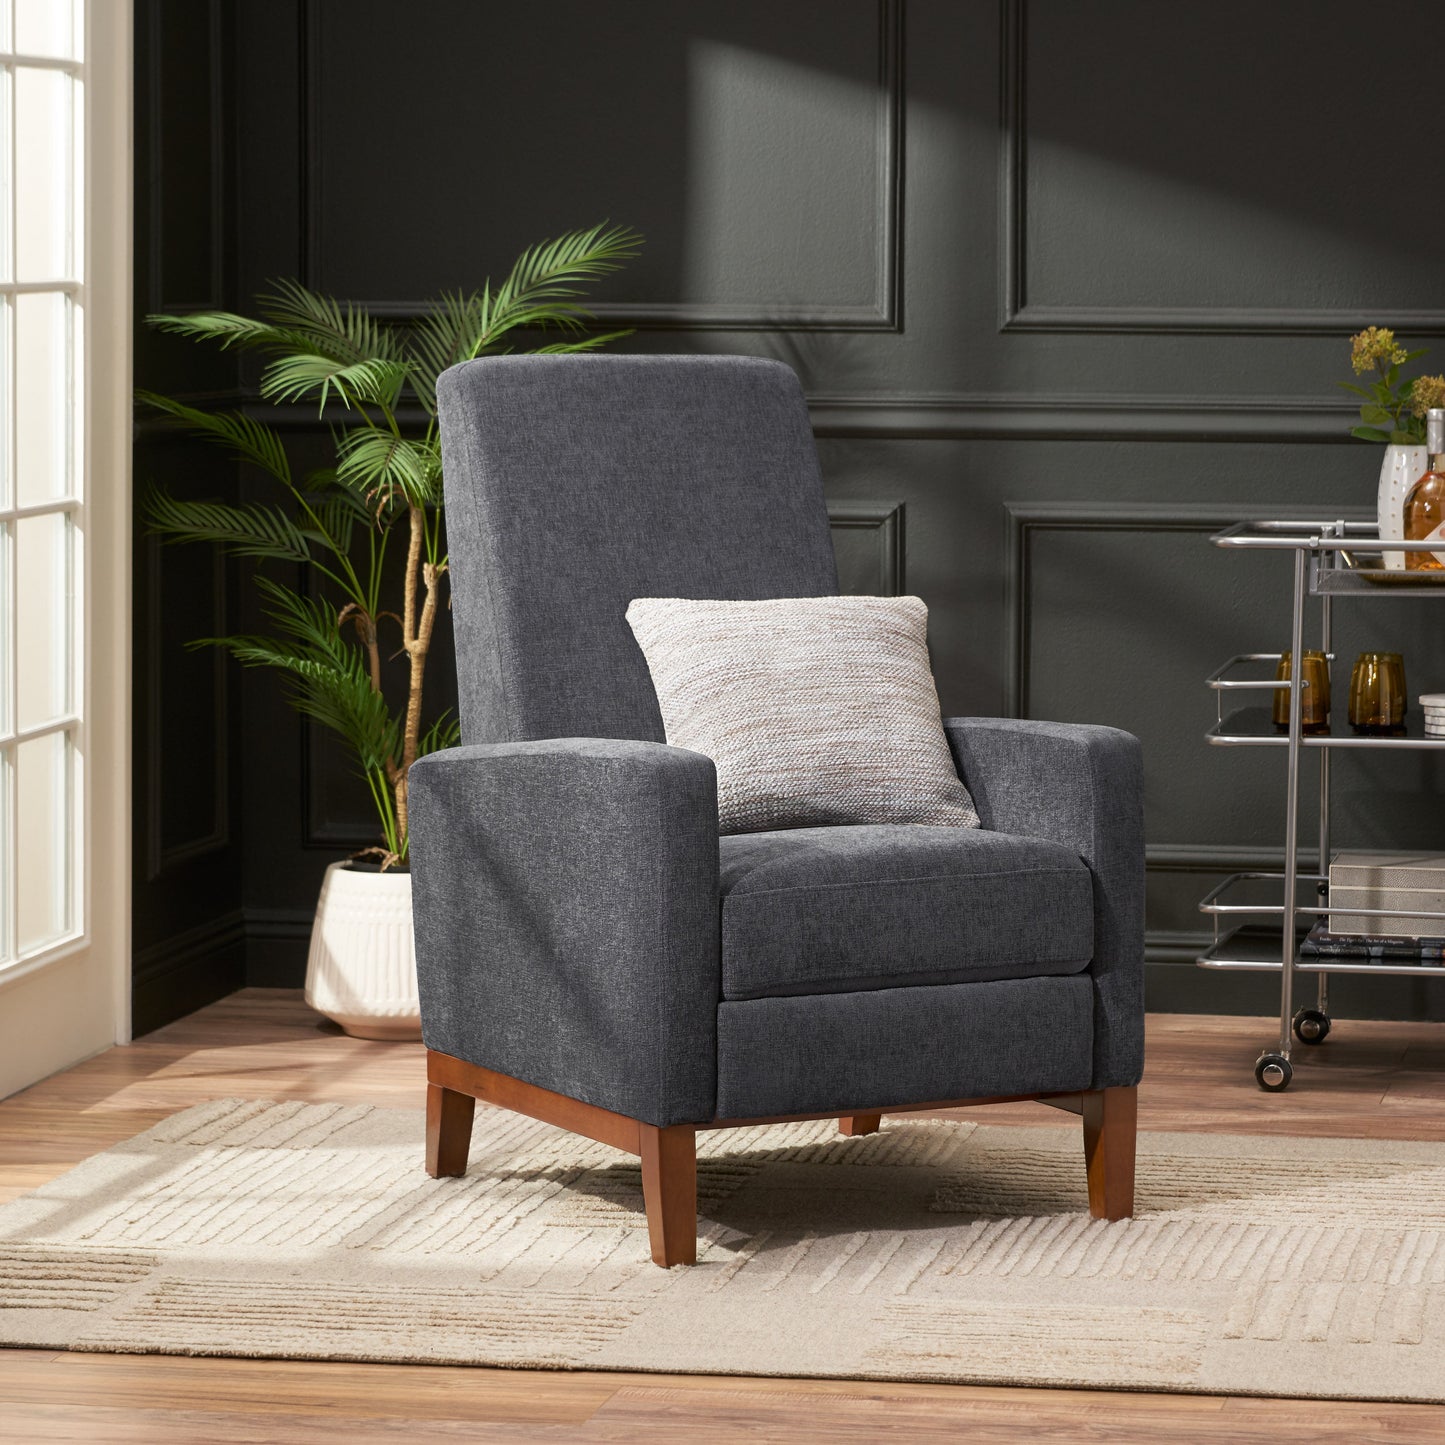 Plevna Contemporary Fabric Upholstered Pushback Recliner